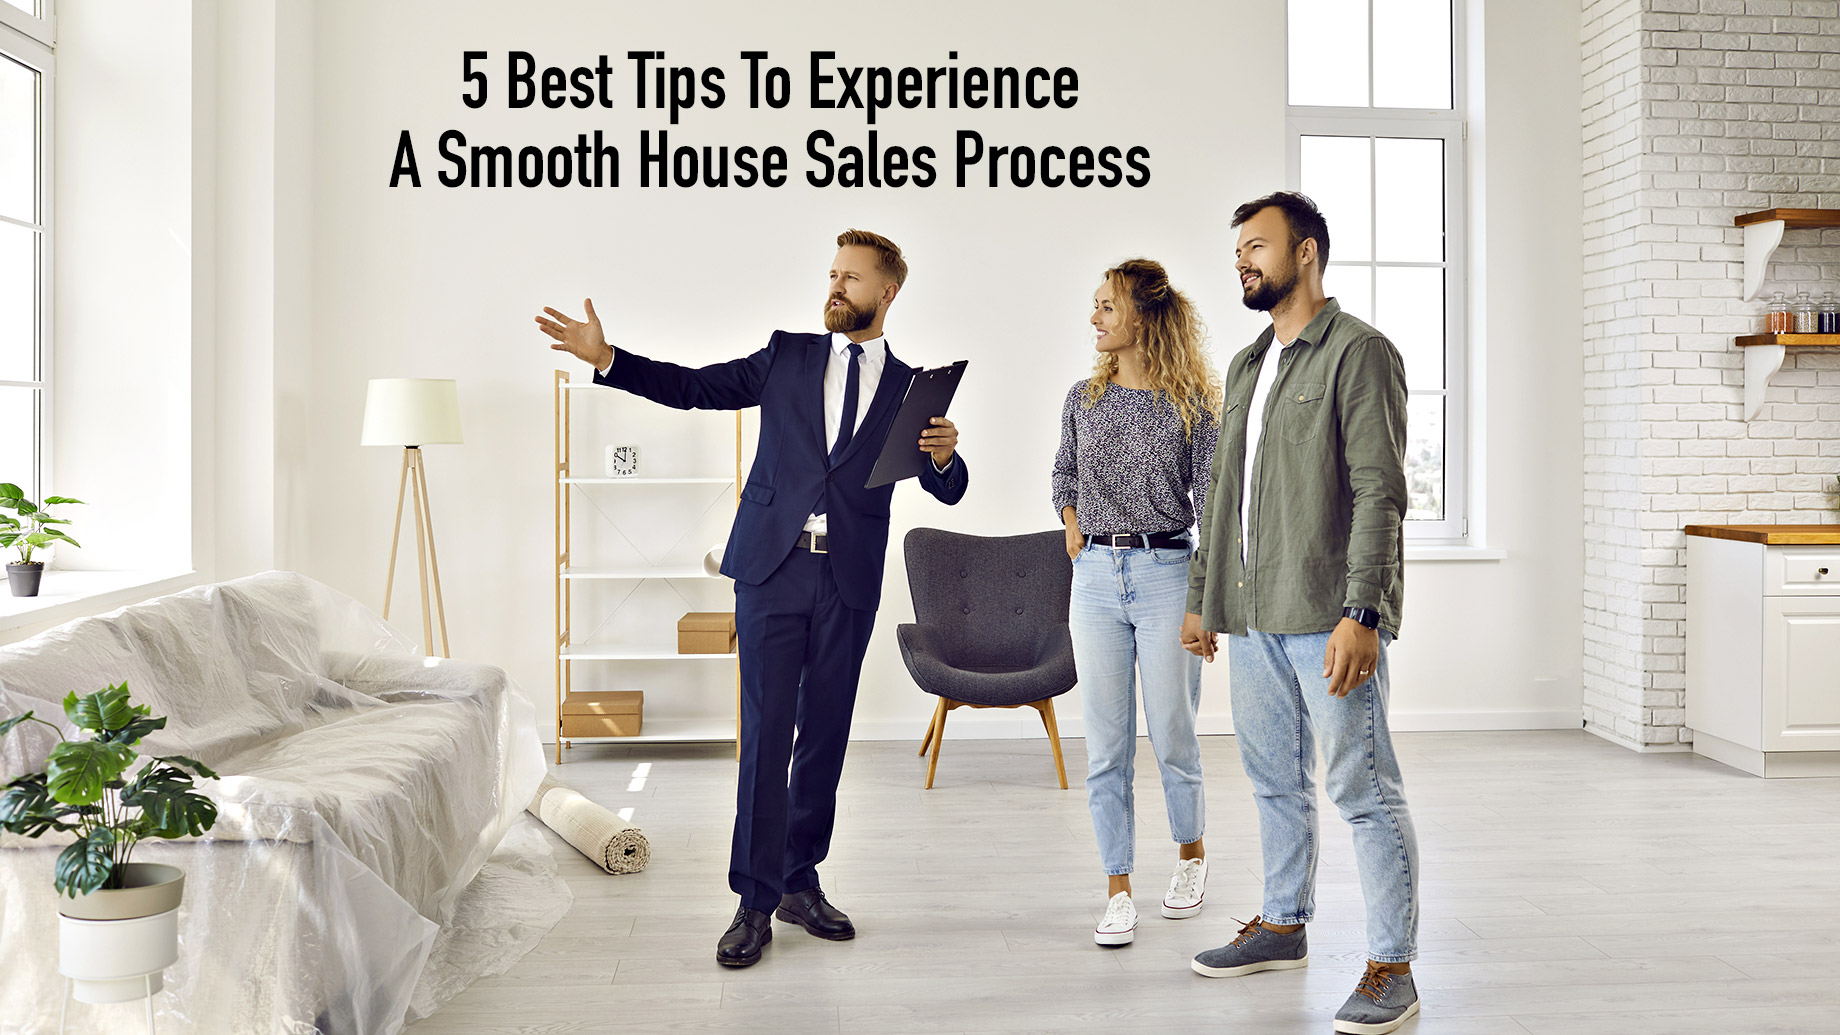 5 Best Tips To Experience A Smooth House Sales Process